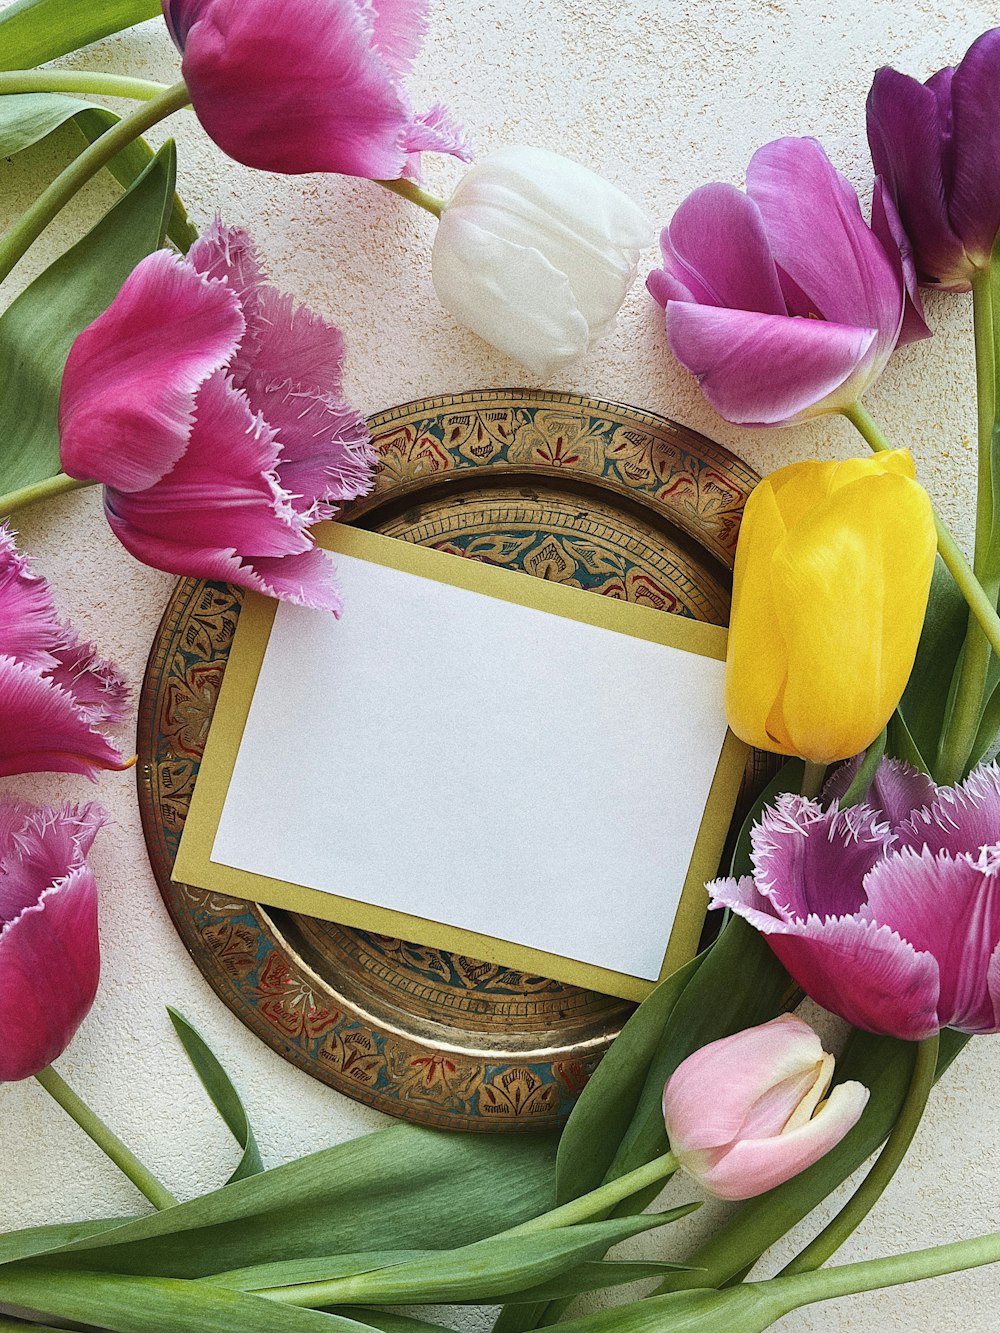 a plate with a blank card surrounded by flowers